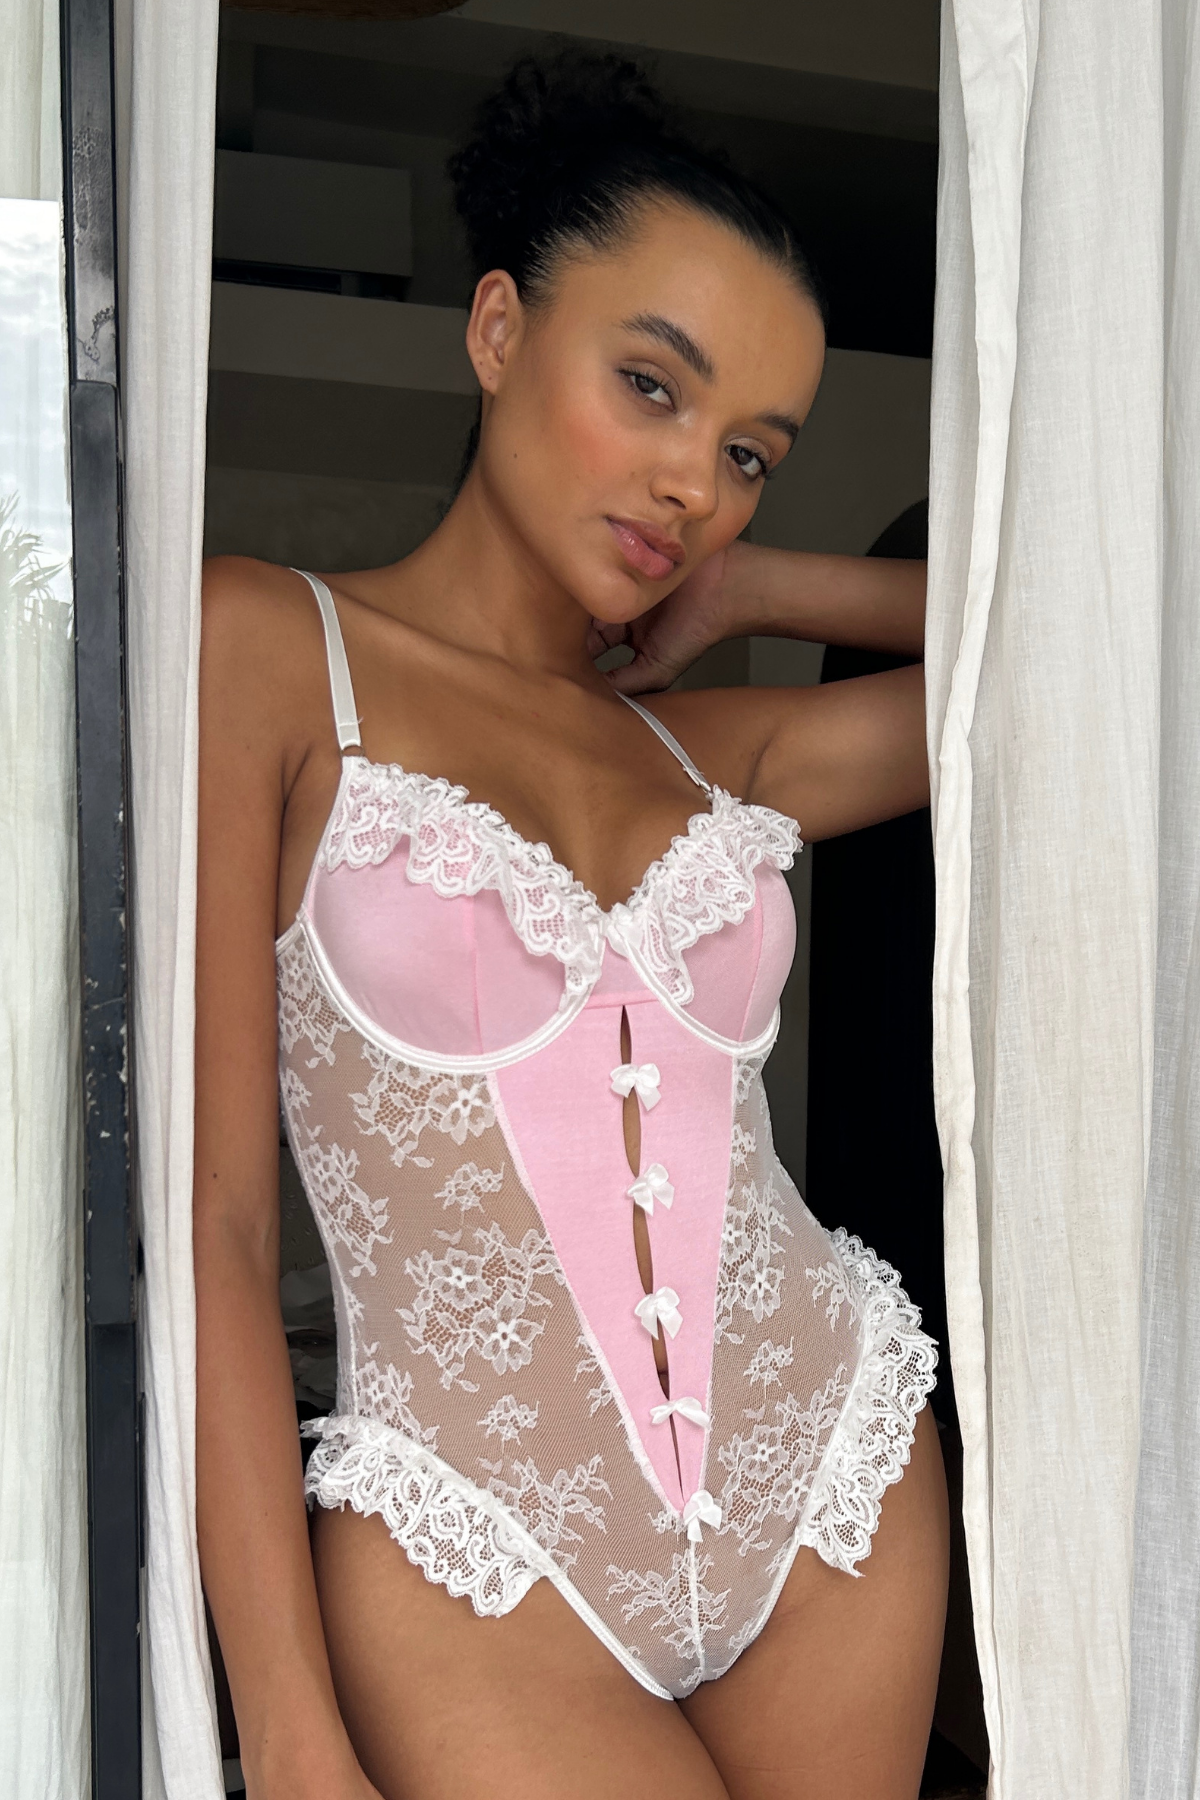 Based in Australia, One Empire Sleep features beautifully made lace lingerie sets, bralettes, lace bodysuits, bustiers and sleep sets in a range of colours and styles.